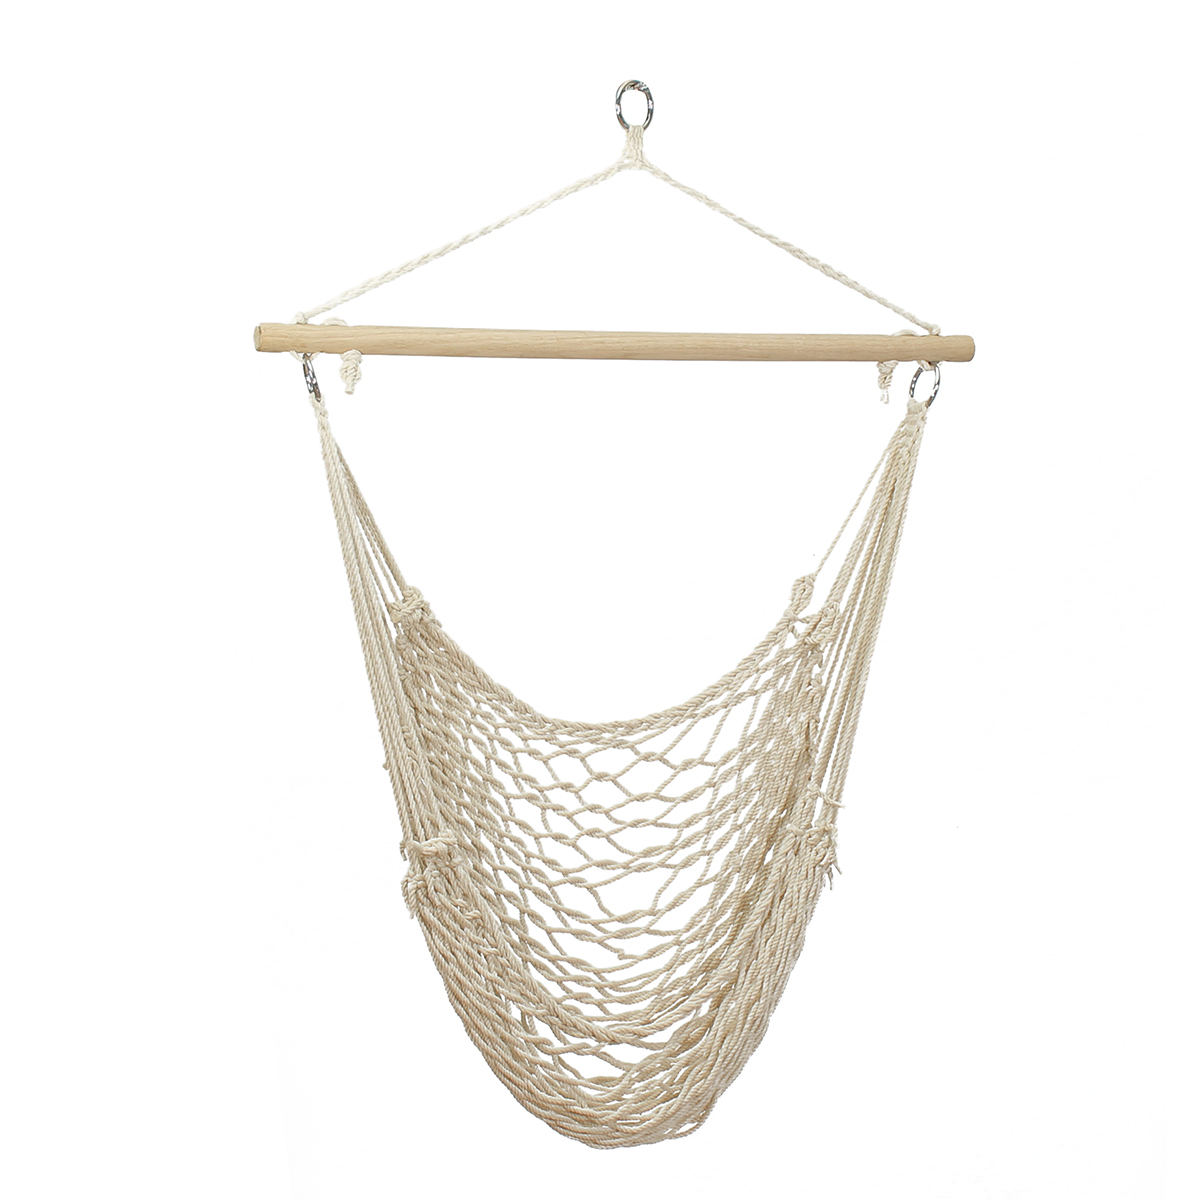 135-x-90CM-Portable-Outdoor-Swing-Cotton-Hammock-Chair-Wooden-Bar-Hanging-Rope-Chair-For-Garden-Pati-1304667-5